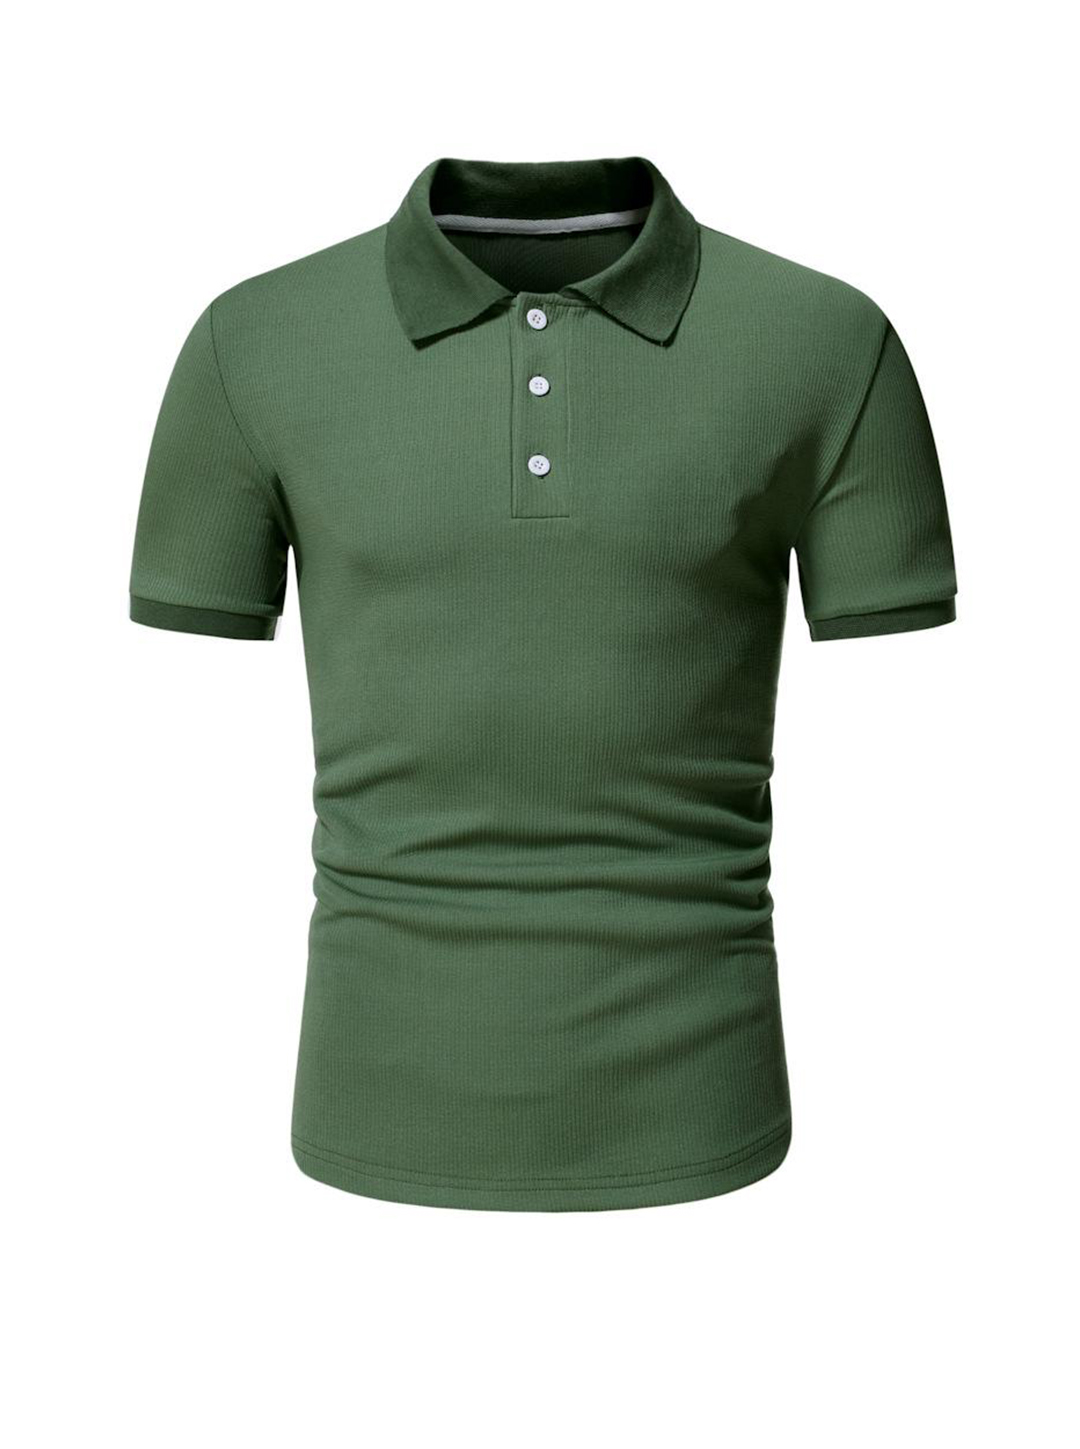 Men's Larry Textured Fabric Solid Color Short-sleeved Polo T-shirt-poisonstreetwear.com